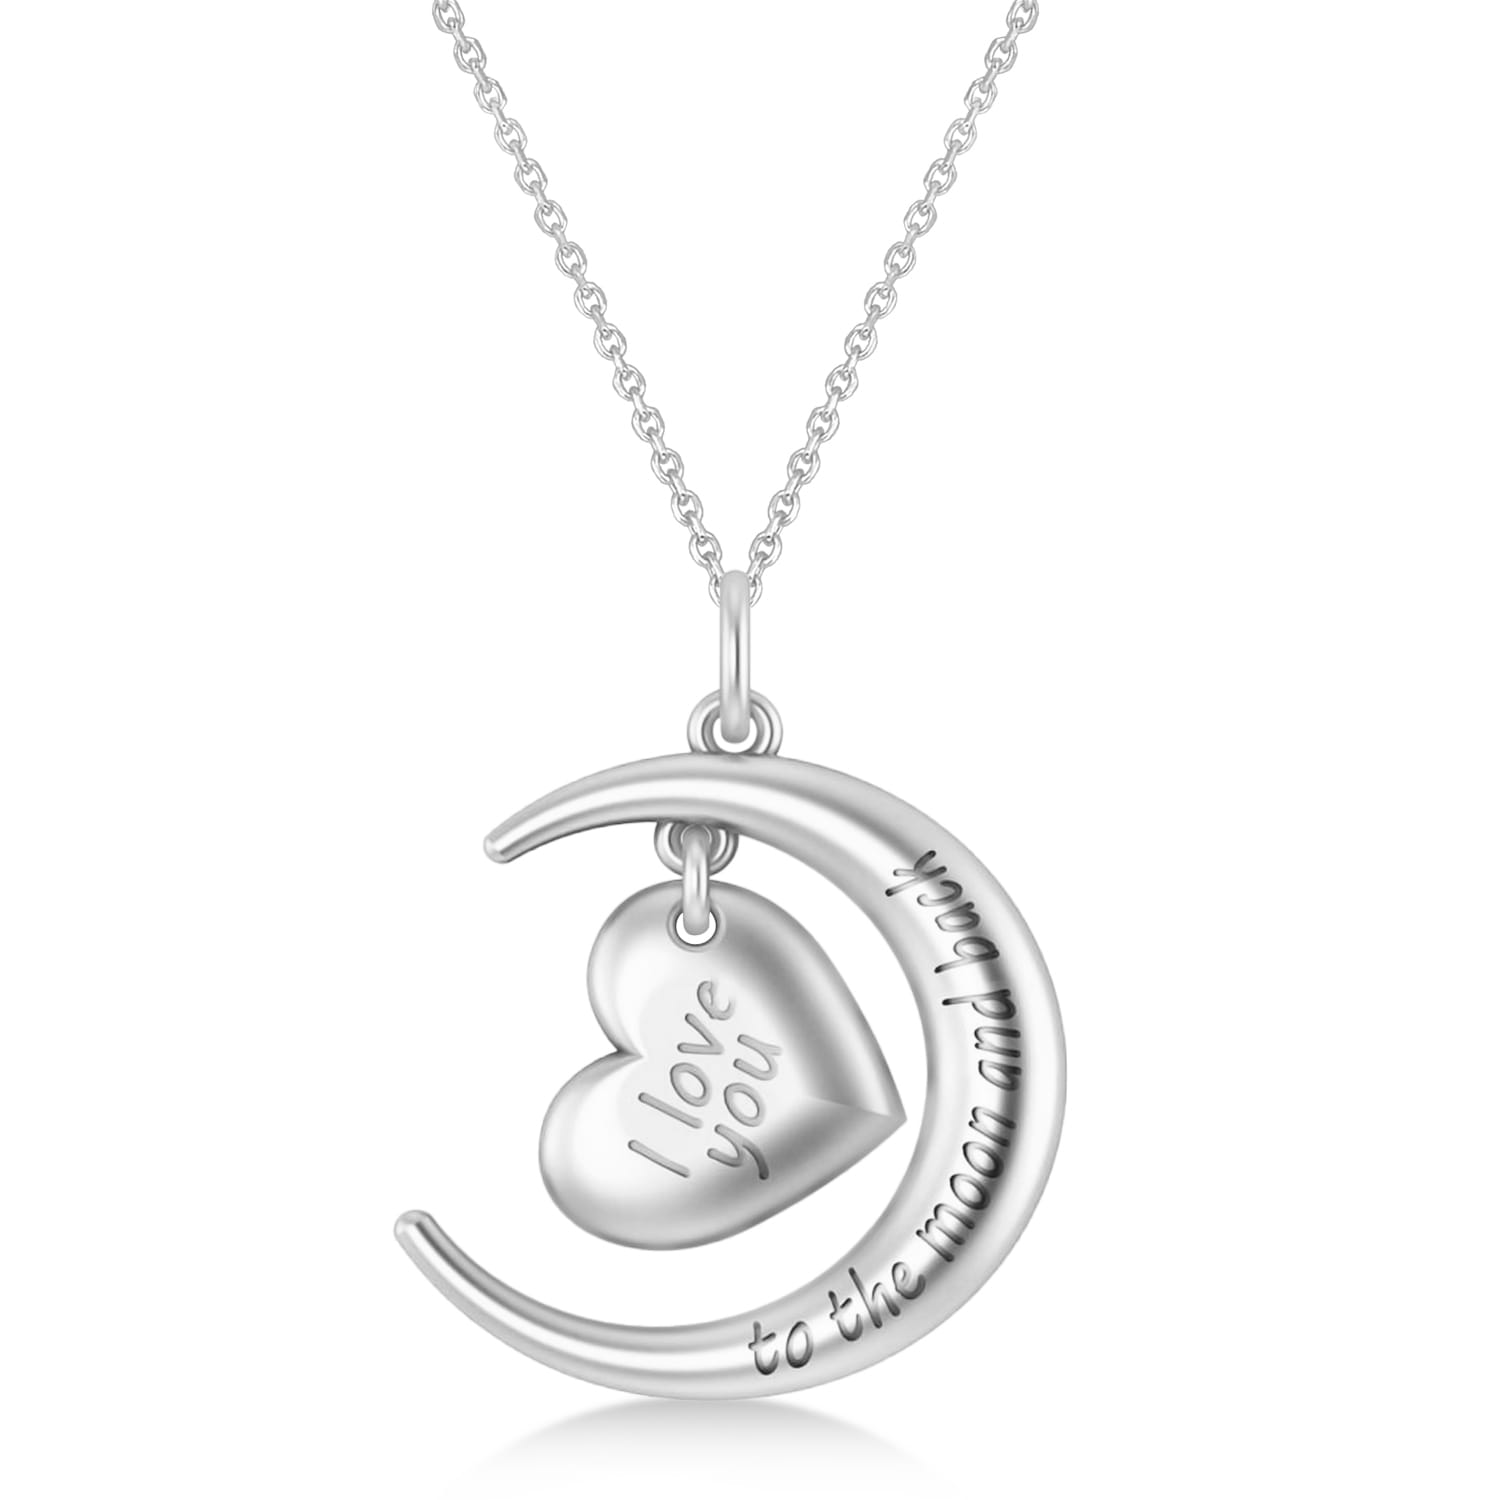 Moon with Heart " I Love You To The Moon and Back" Pendant Necklace 14K White Gold